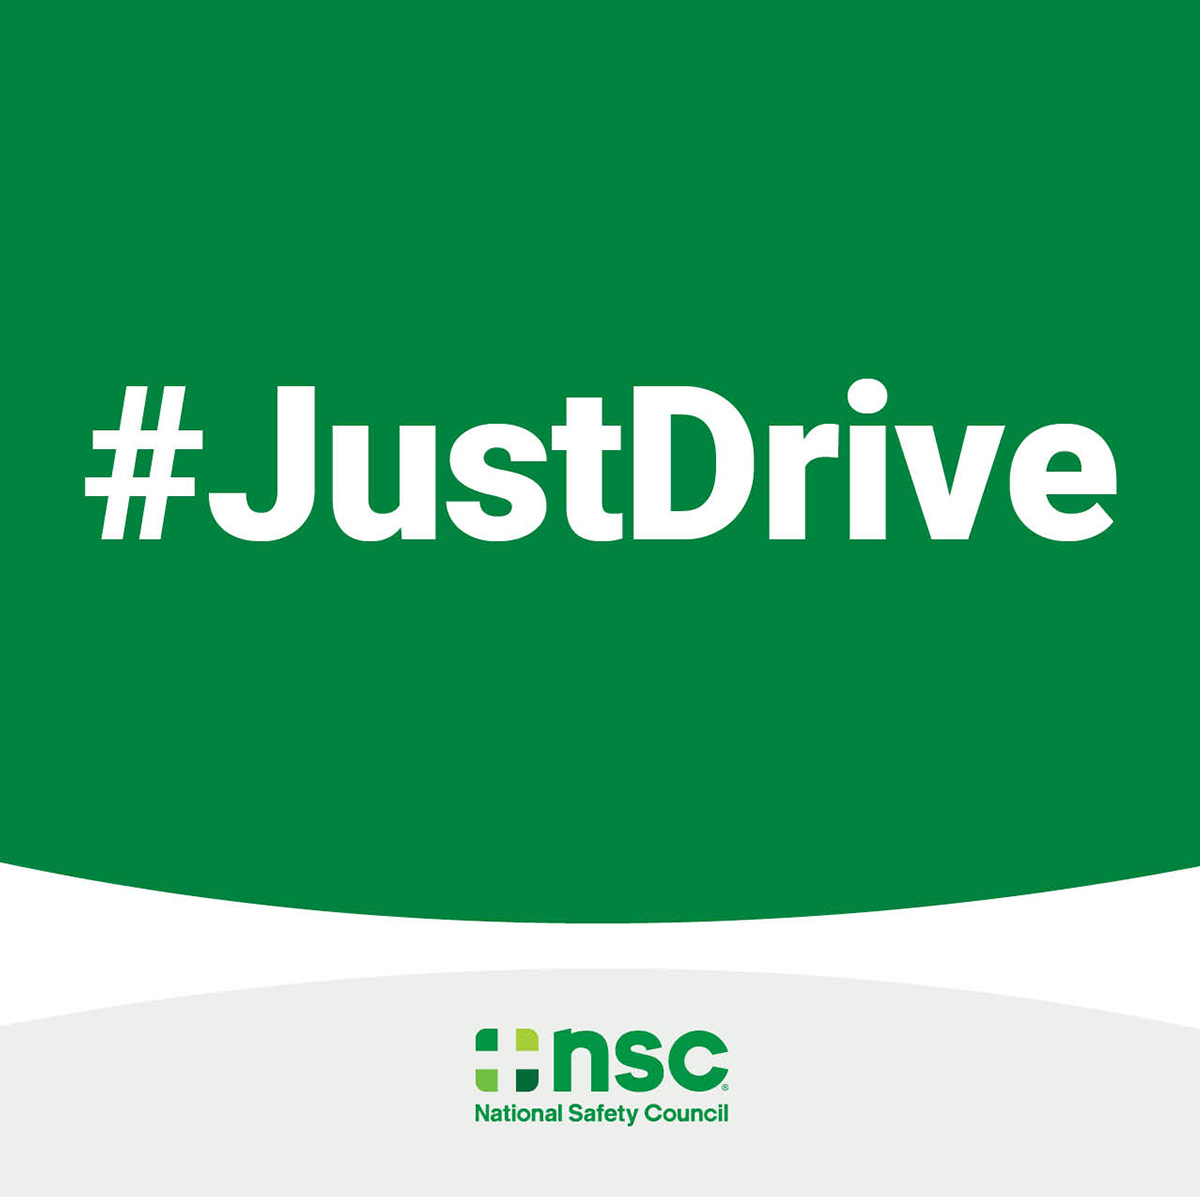 Do you know the simple steps you can take to avoid #distracteddriving? Enabling do not disturb mode and taking care of texts before you drive can help #KeepEachOtherSafe. Take the @NSCsafety #JustDrive Pledge to drive distraction-free: bit.ly/NSCPledge24 #DDAM